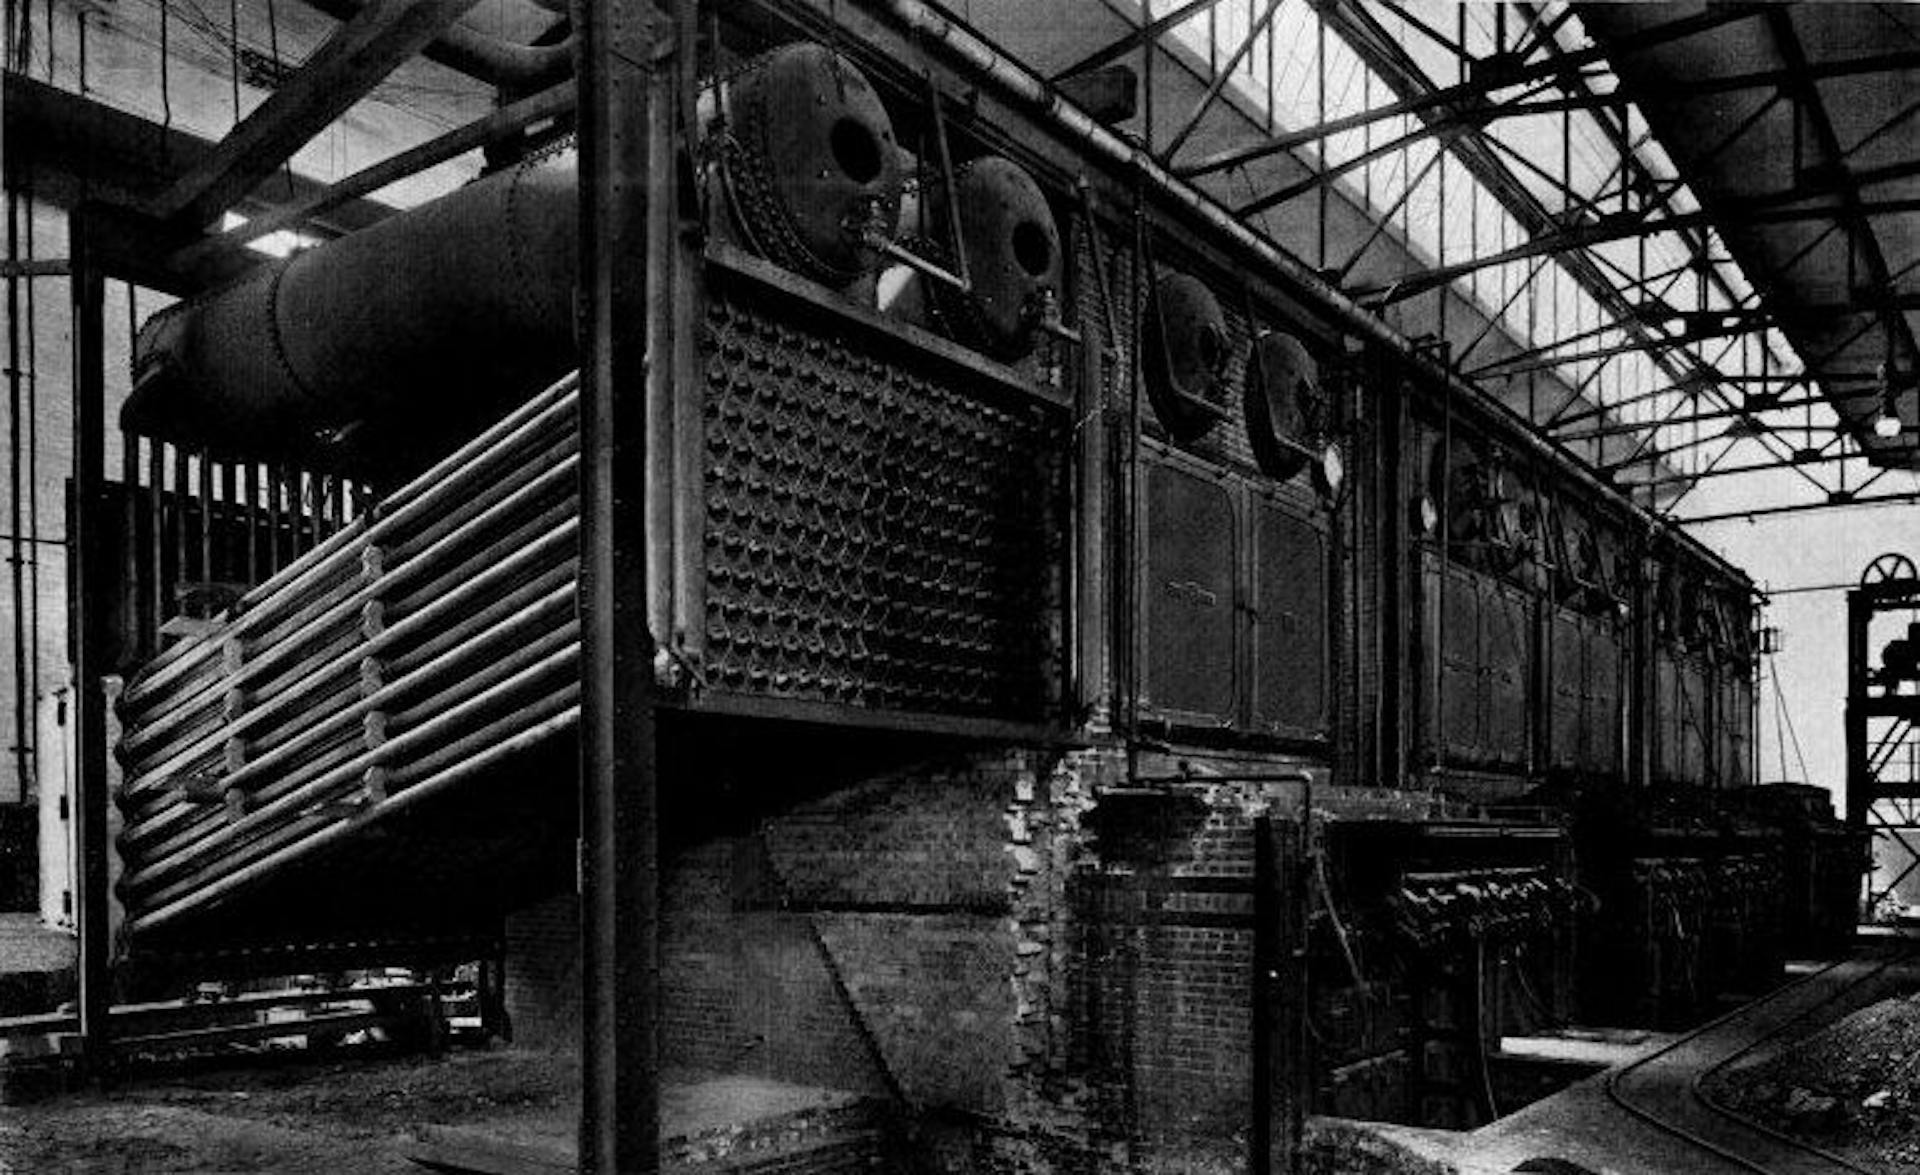 2640 Horse-power Installation of Babcock & Wilcox Boilers at the Botany Worsted Mills, Passaic, N. J.